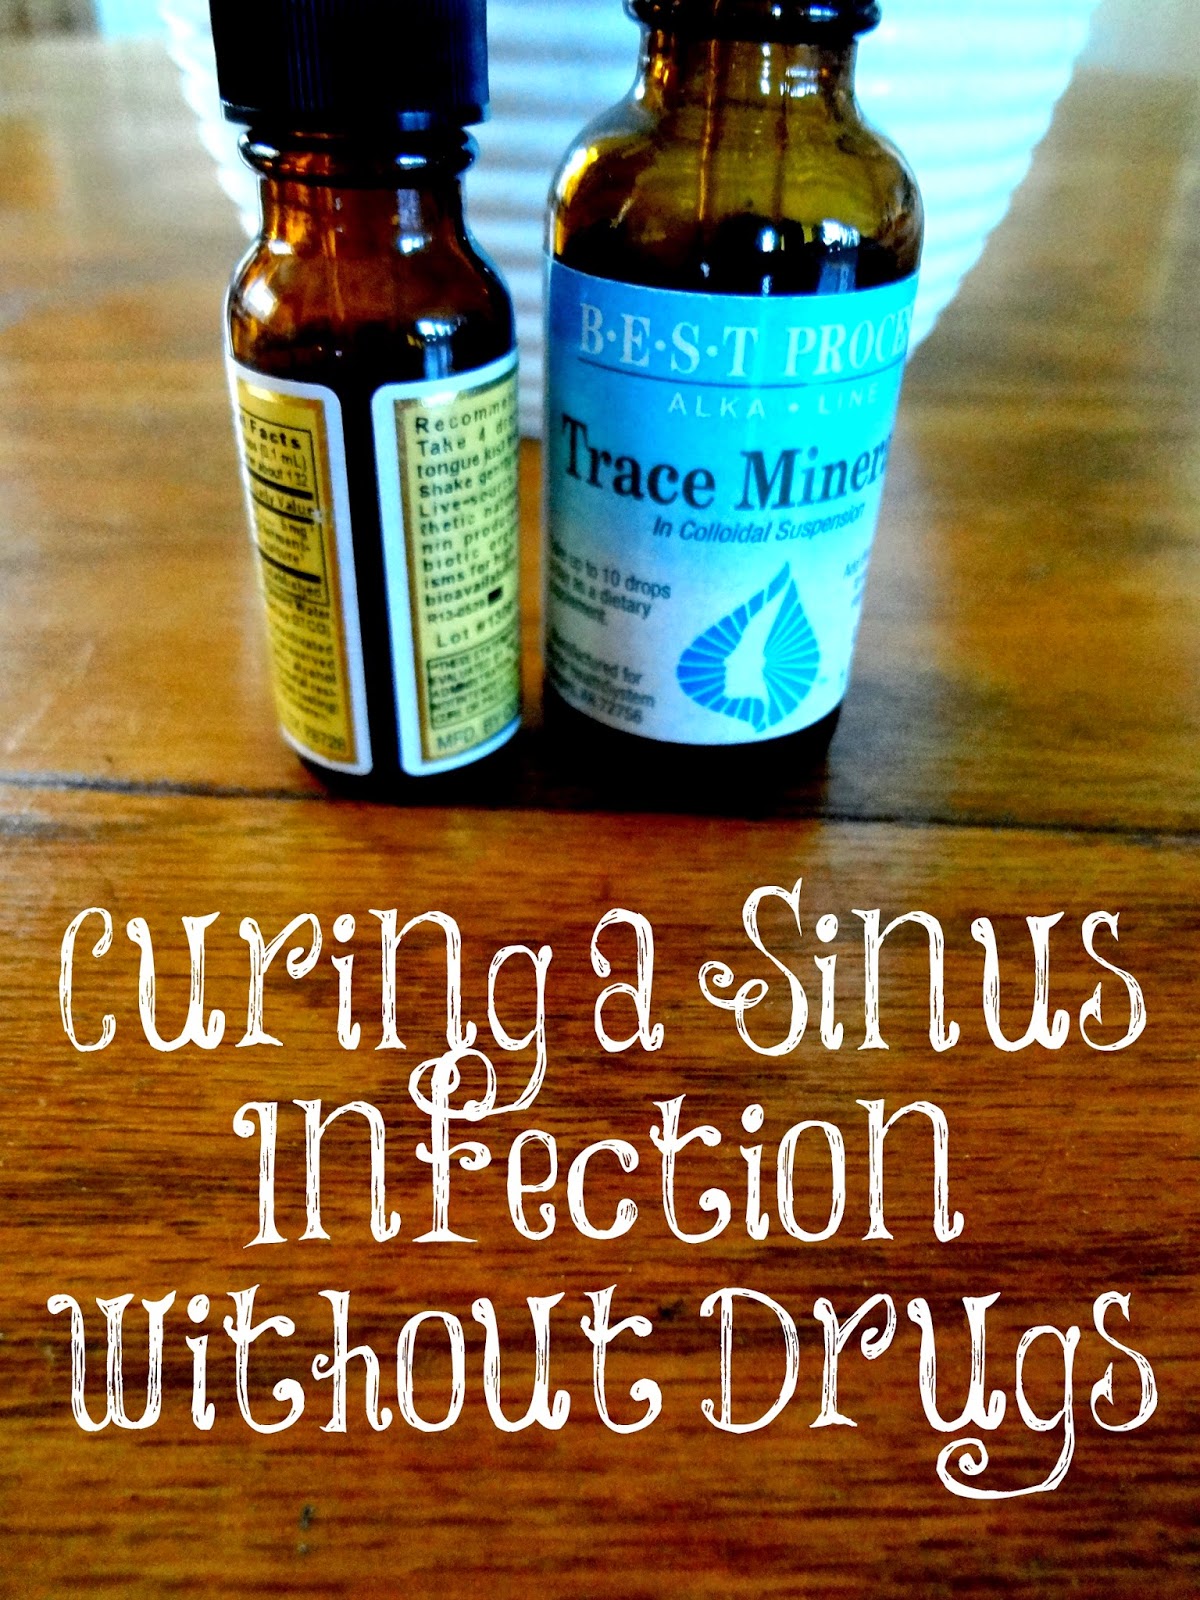 Always Learning Curing a Sinus Infection without Drugs!